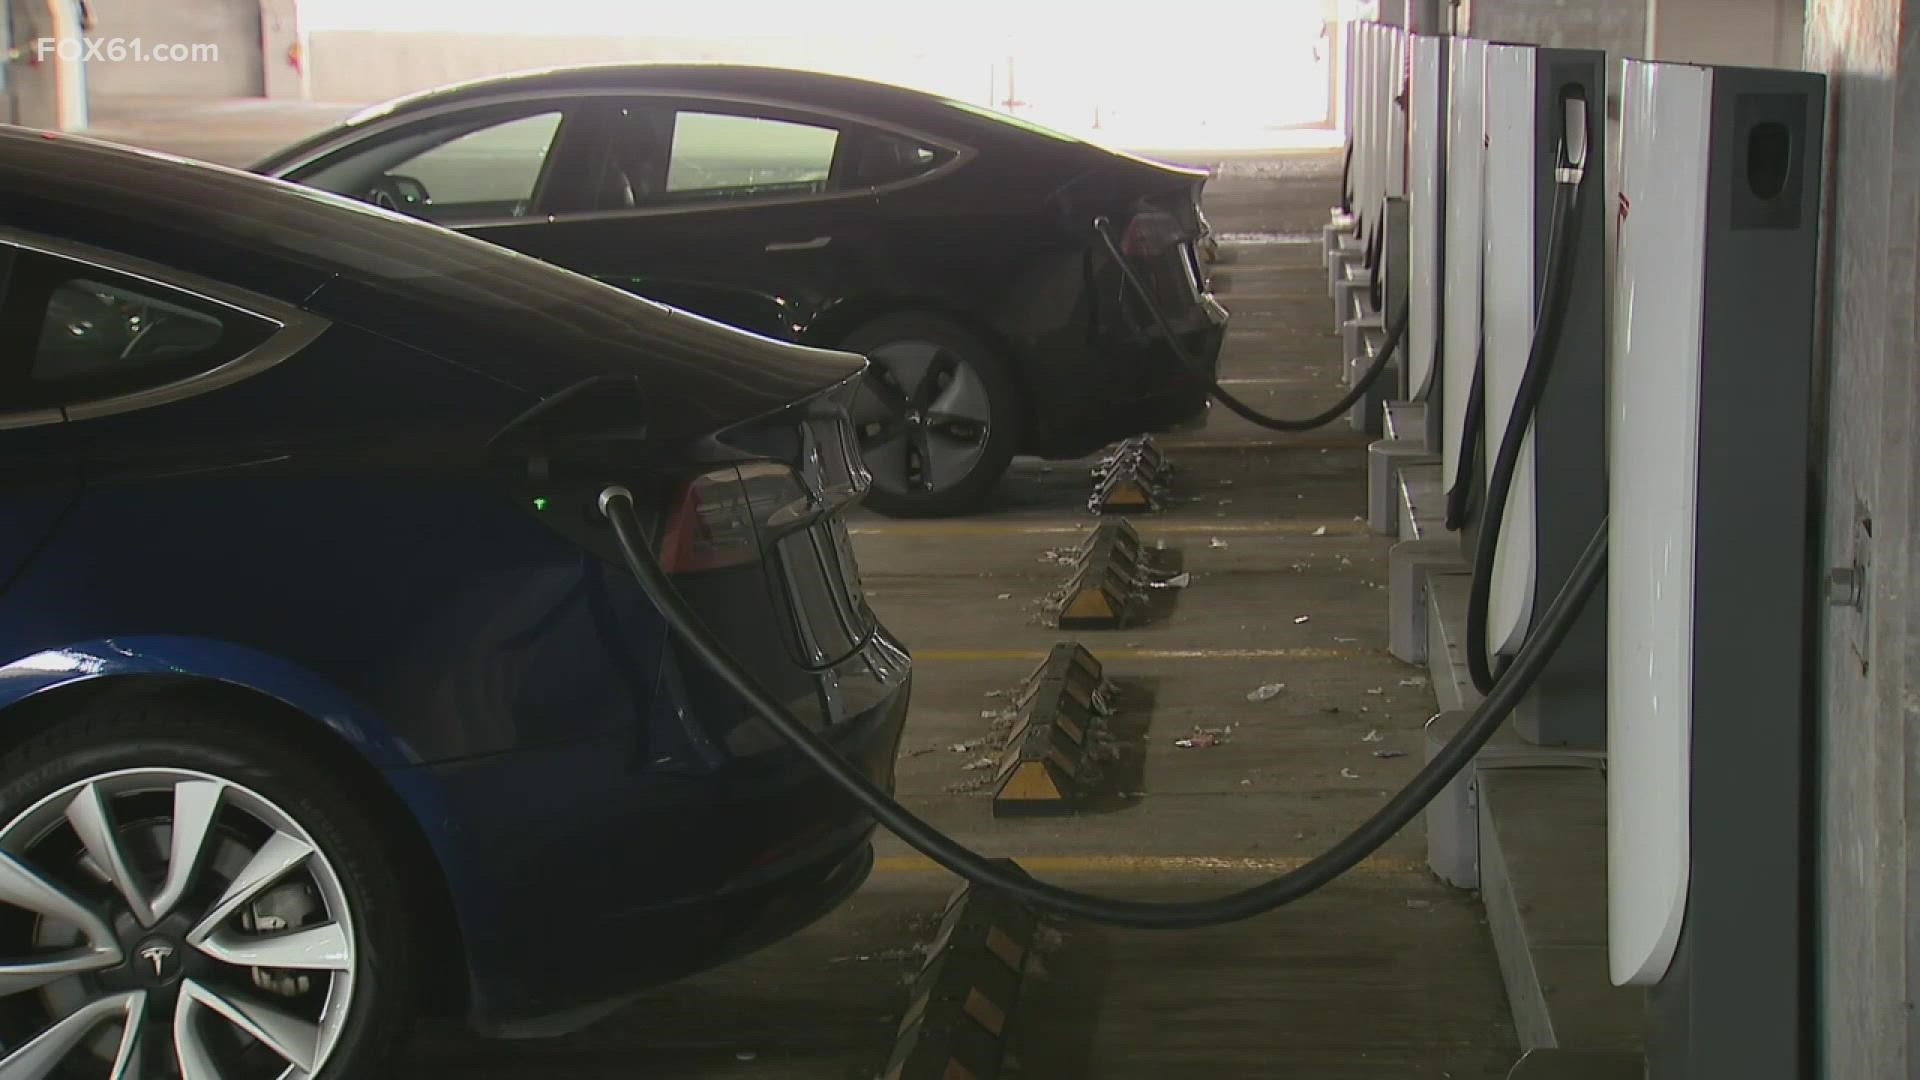 "I think we were reaching a tipping point to begin with but the high gas prices are acting as an accelerant," said Barry Kresch, president of the EV Club of CT.